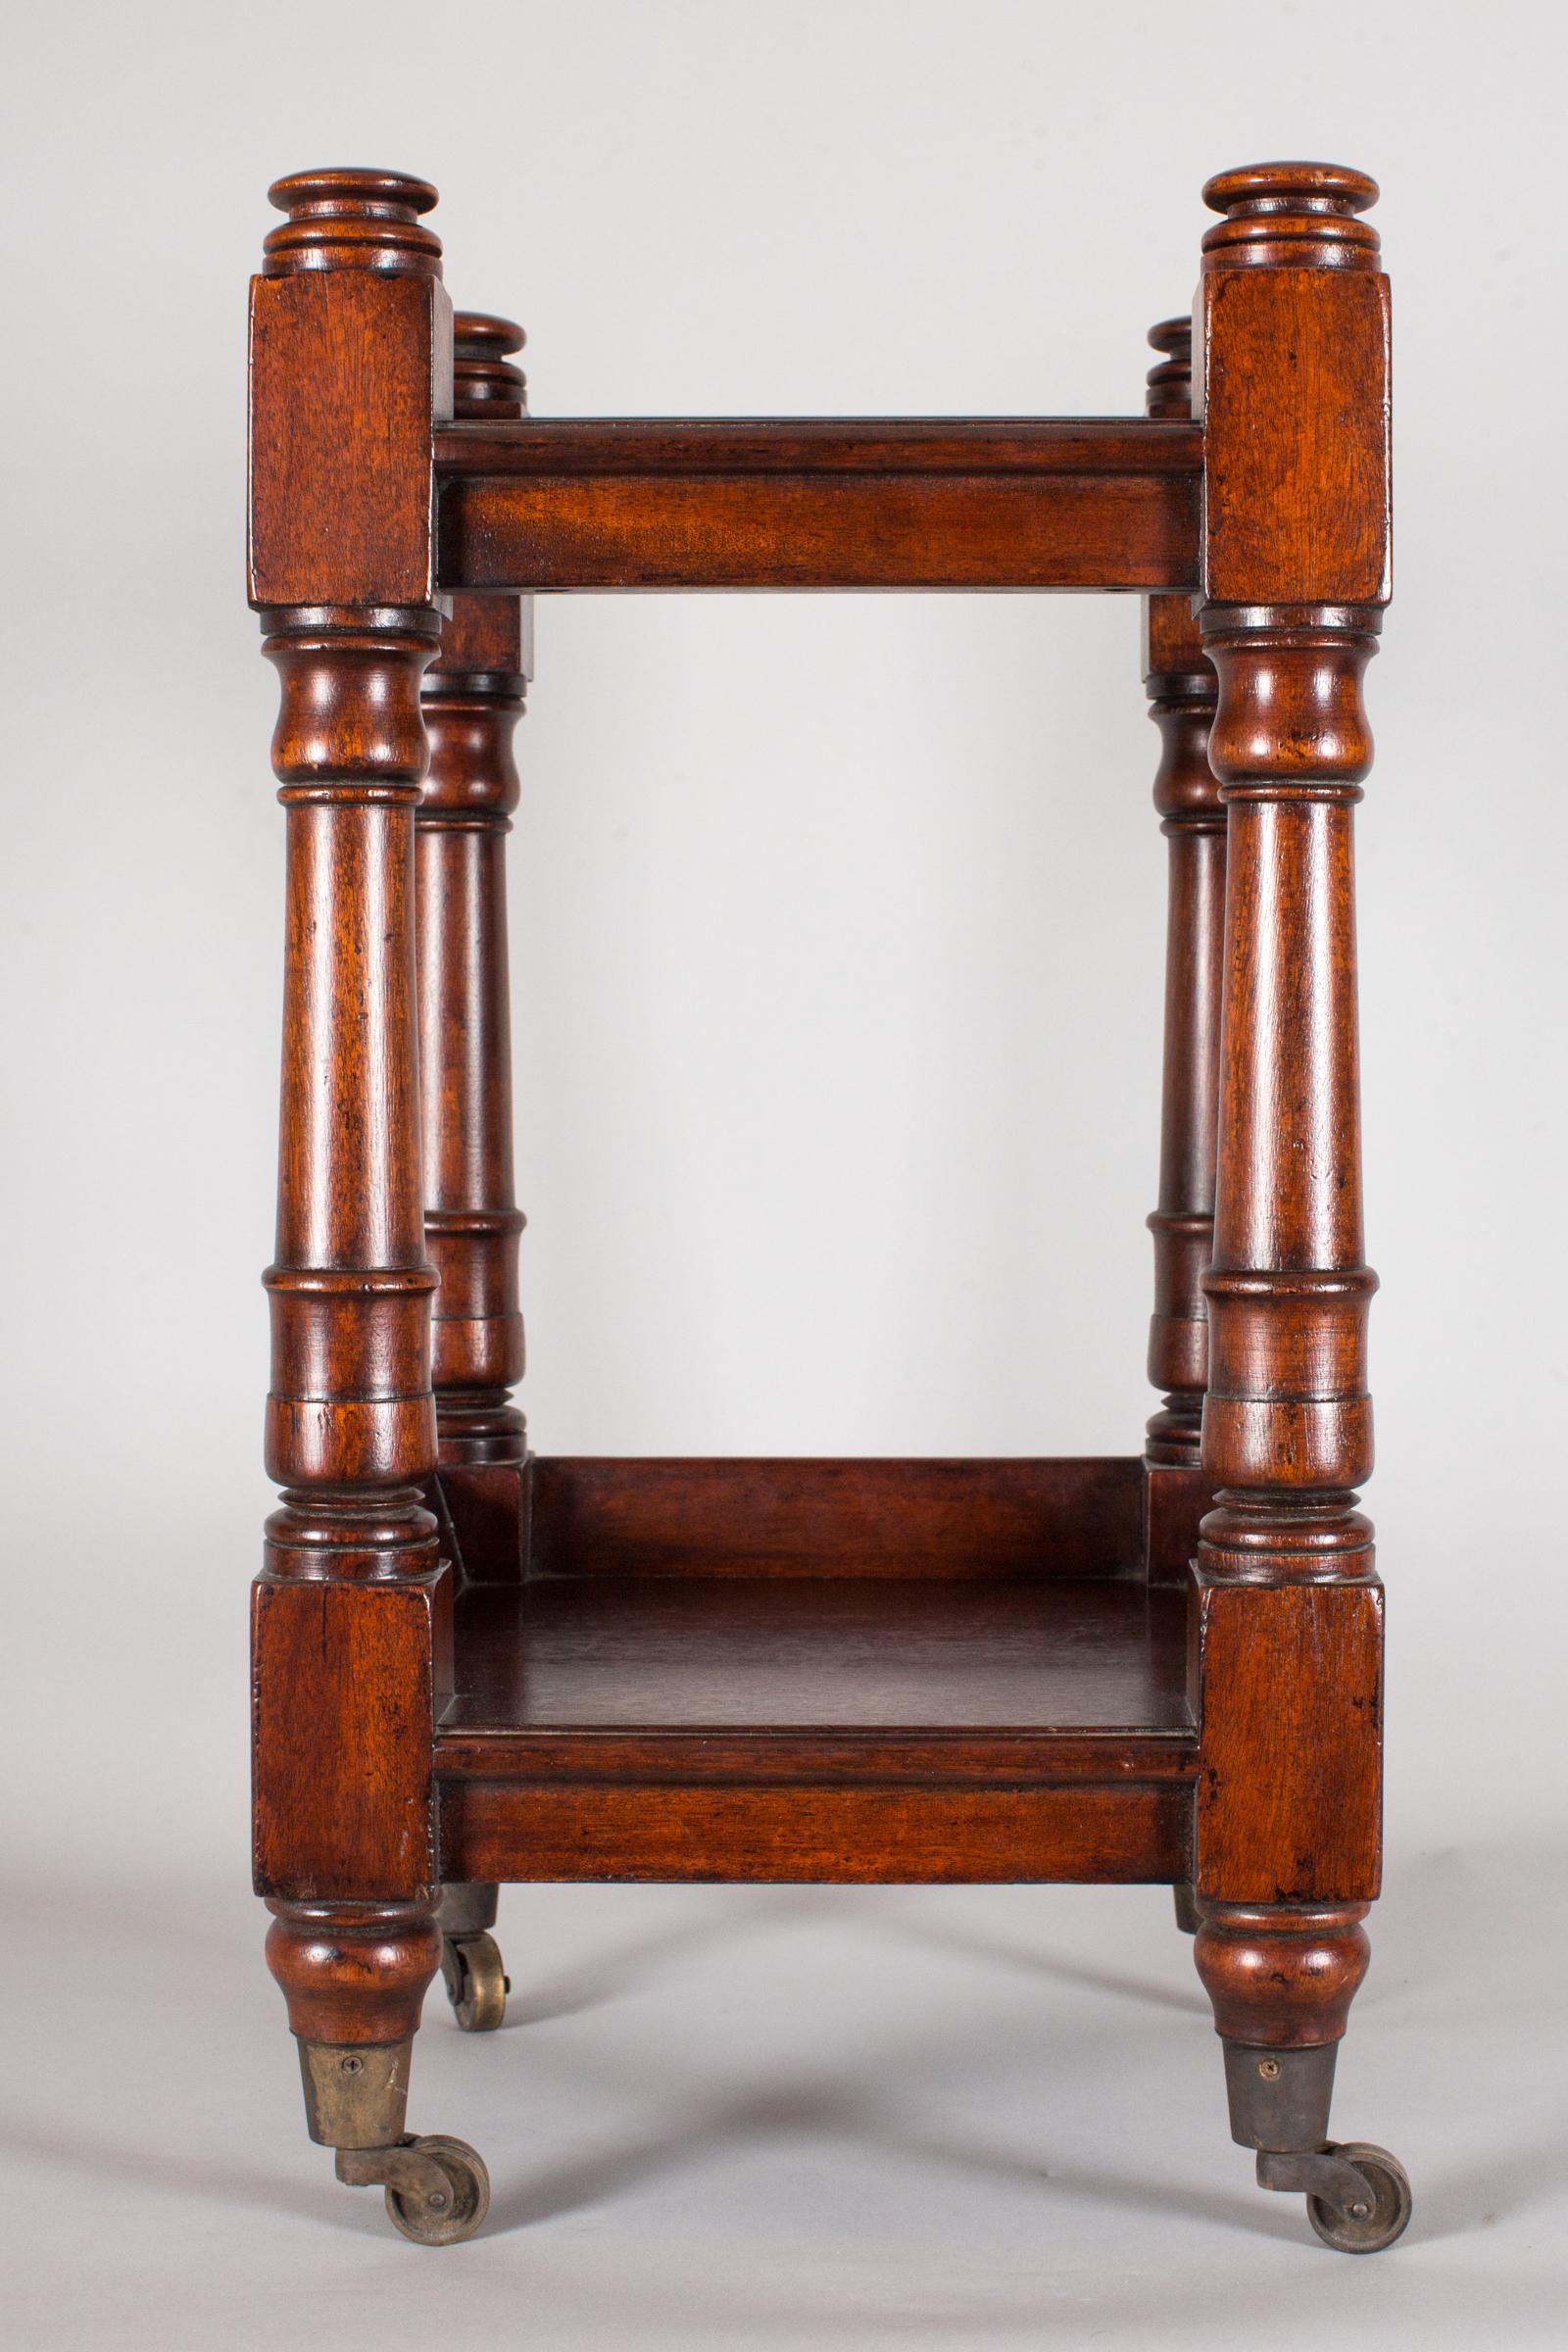 Charming mahogany side table with two levels and on castors (wheels can be removed).